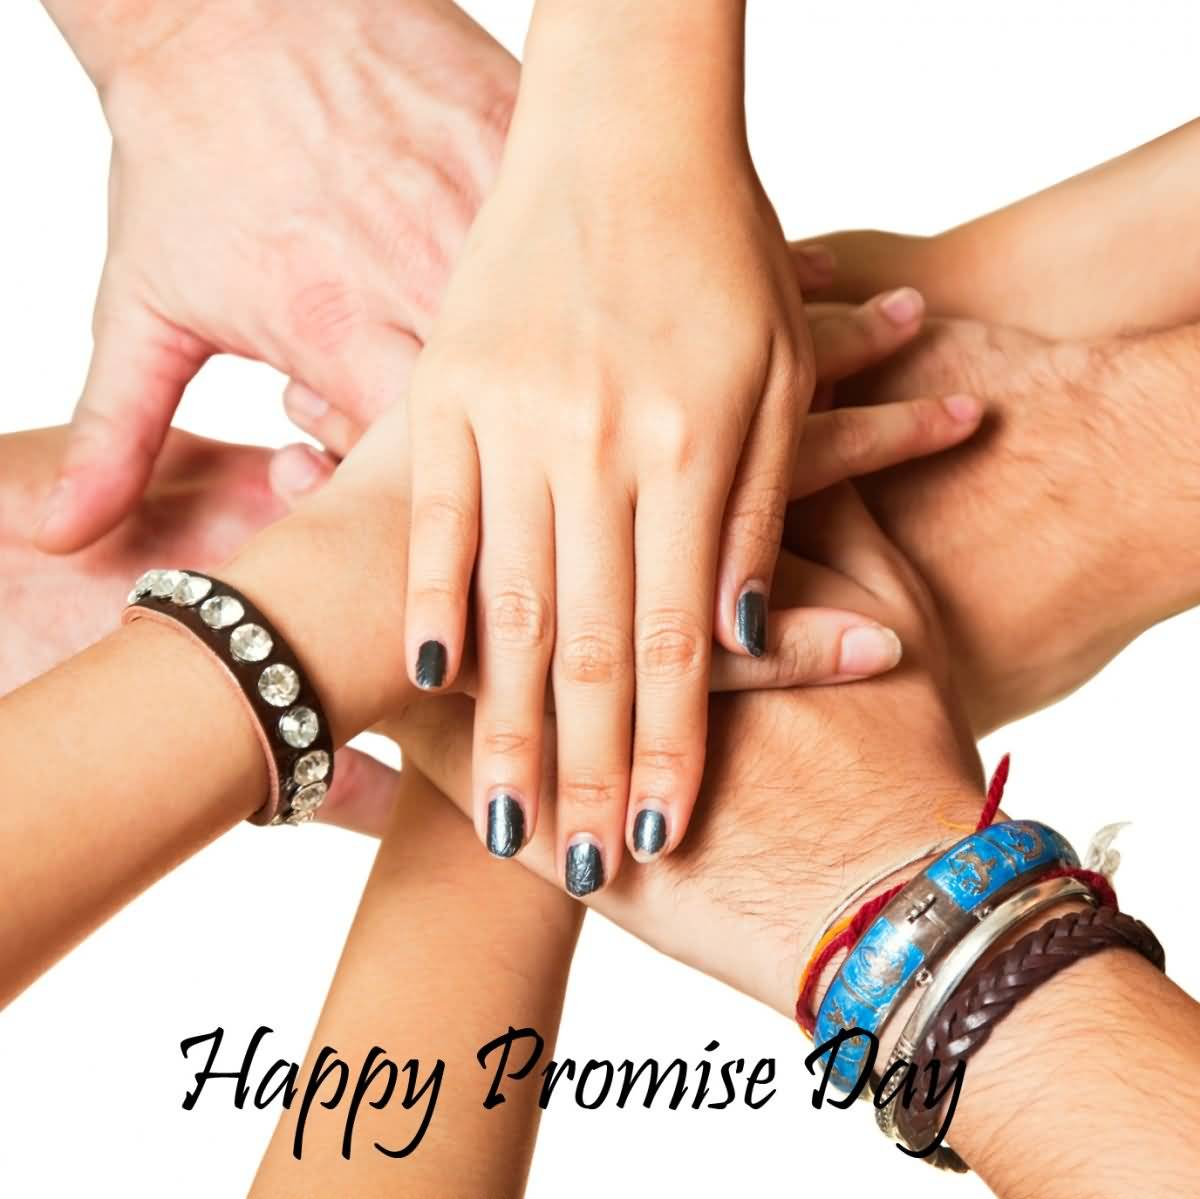 Happy Promise Day Hands On Hands